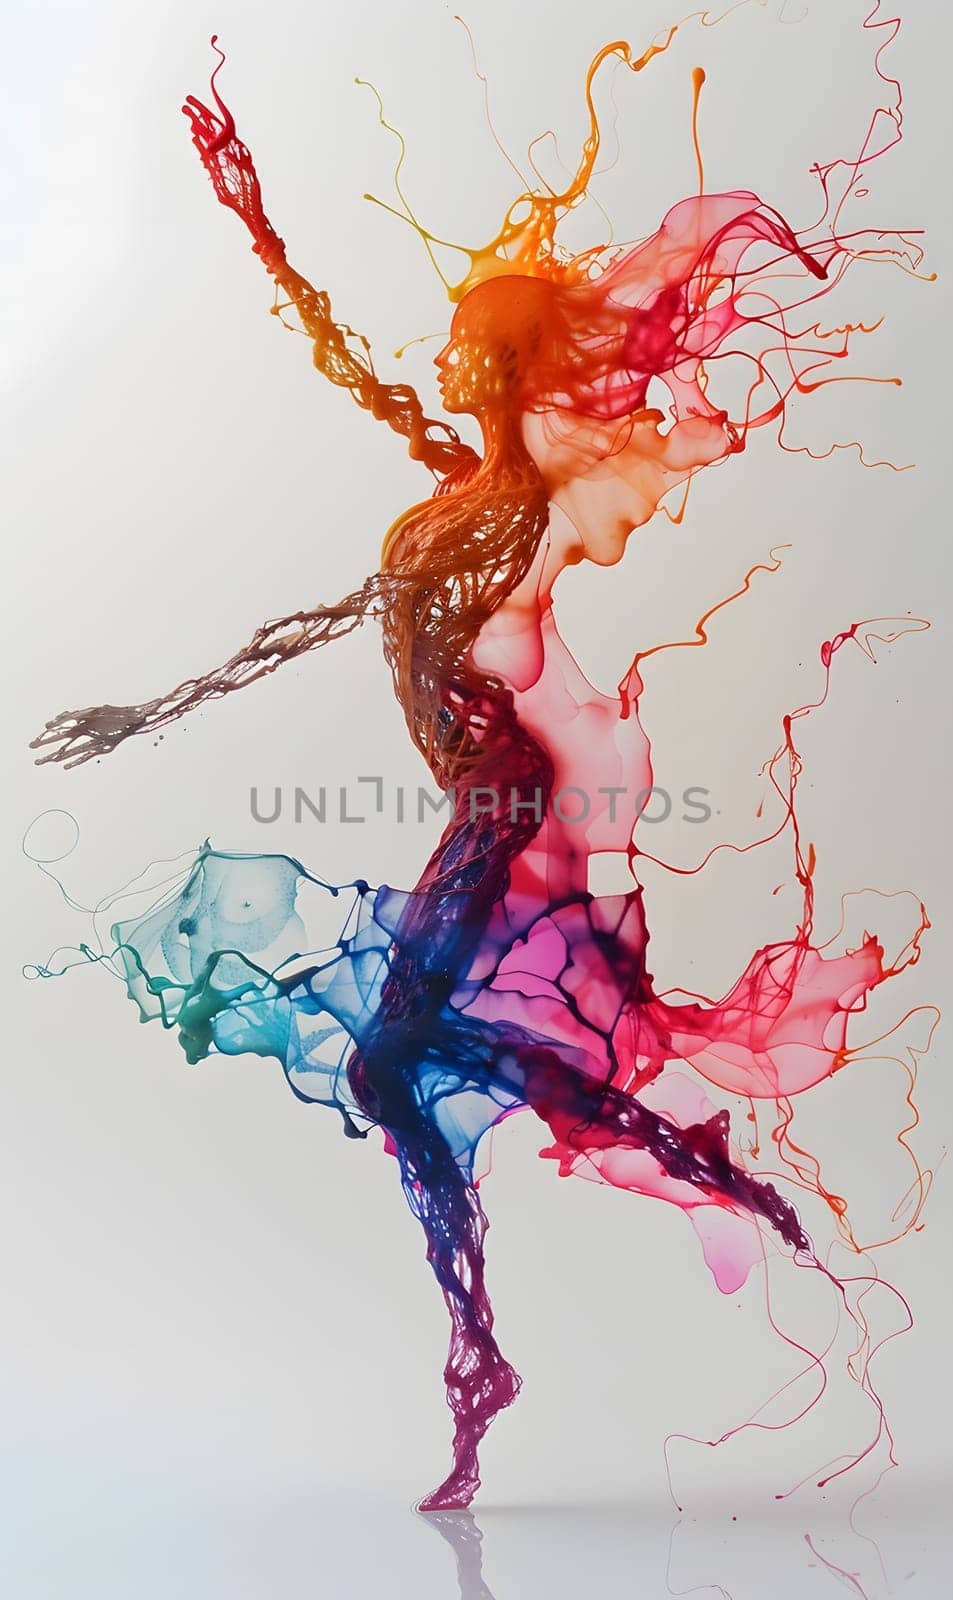 An electric blue painting illustrating a fictional character dancing with liquid paint splashing around her, emphasizing movement and gesture